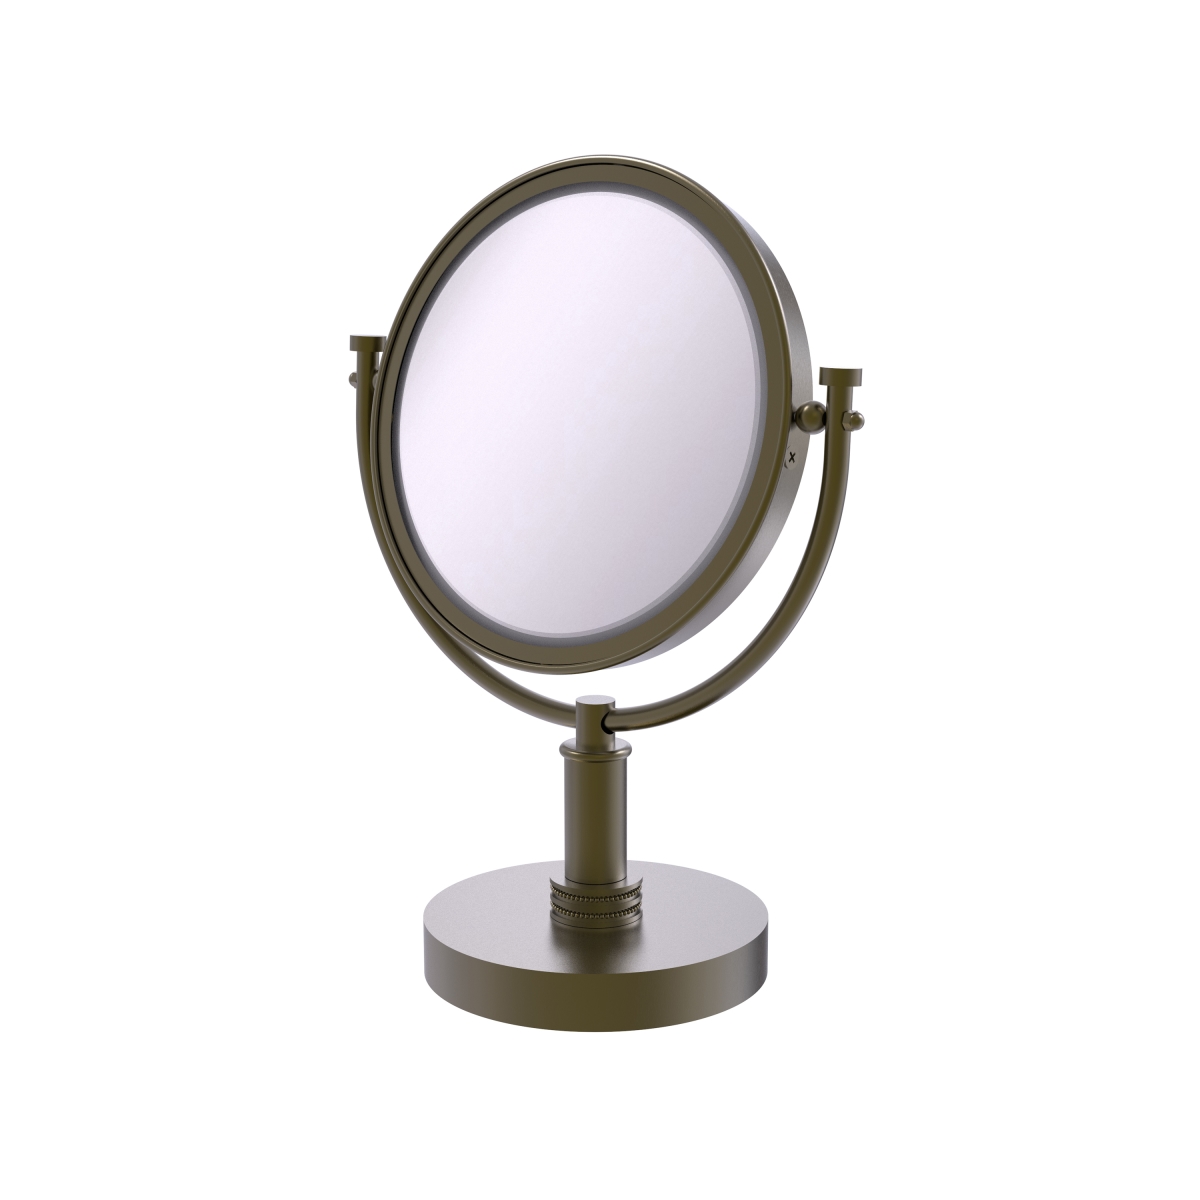 Picture of Allied Brass DM-4D-3X-ABR 8 in. Vanity Top Make-Up Mirror 3X Magnification, Antique Brass - 15 x 8 x 8 in.